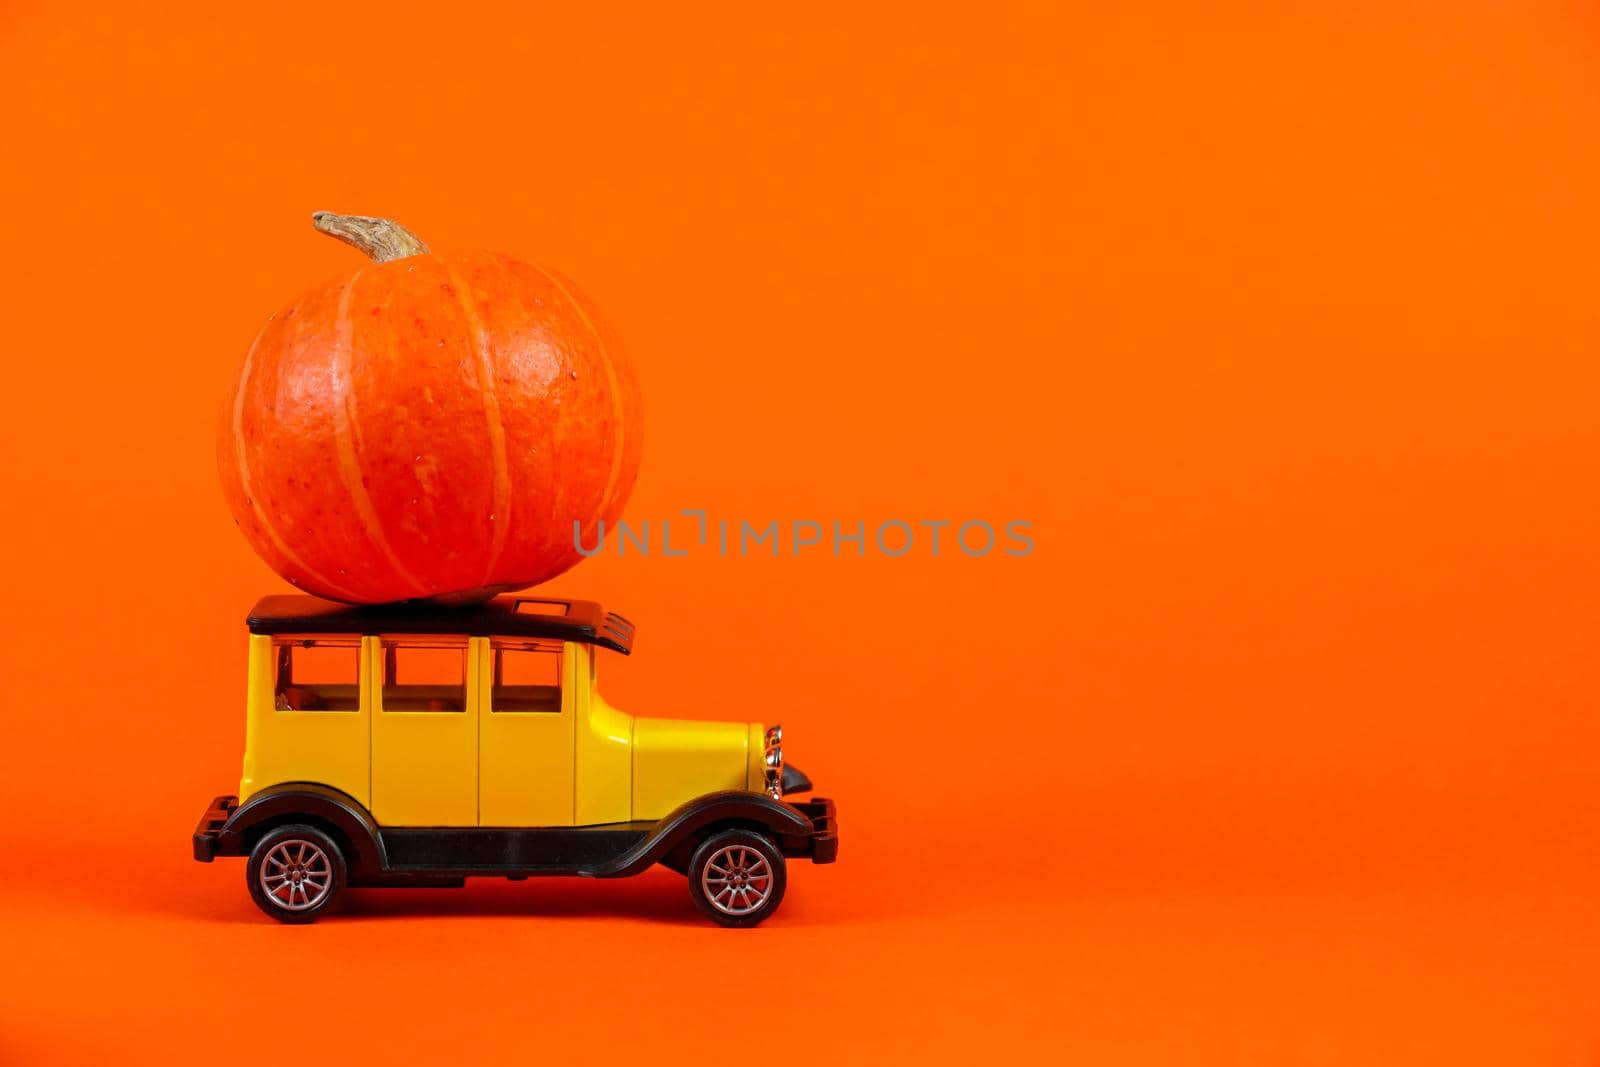 Retro toy car with a pumpkin on an orange background. Halloween and autumn harvest concept, place for text.